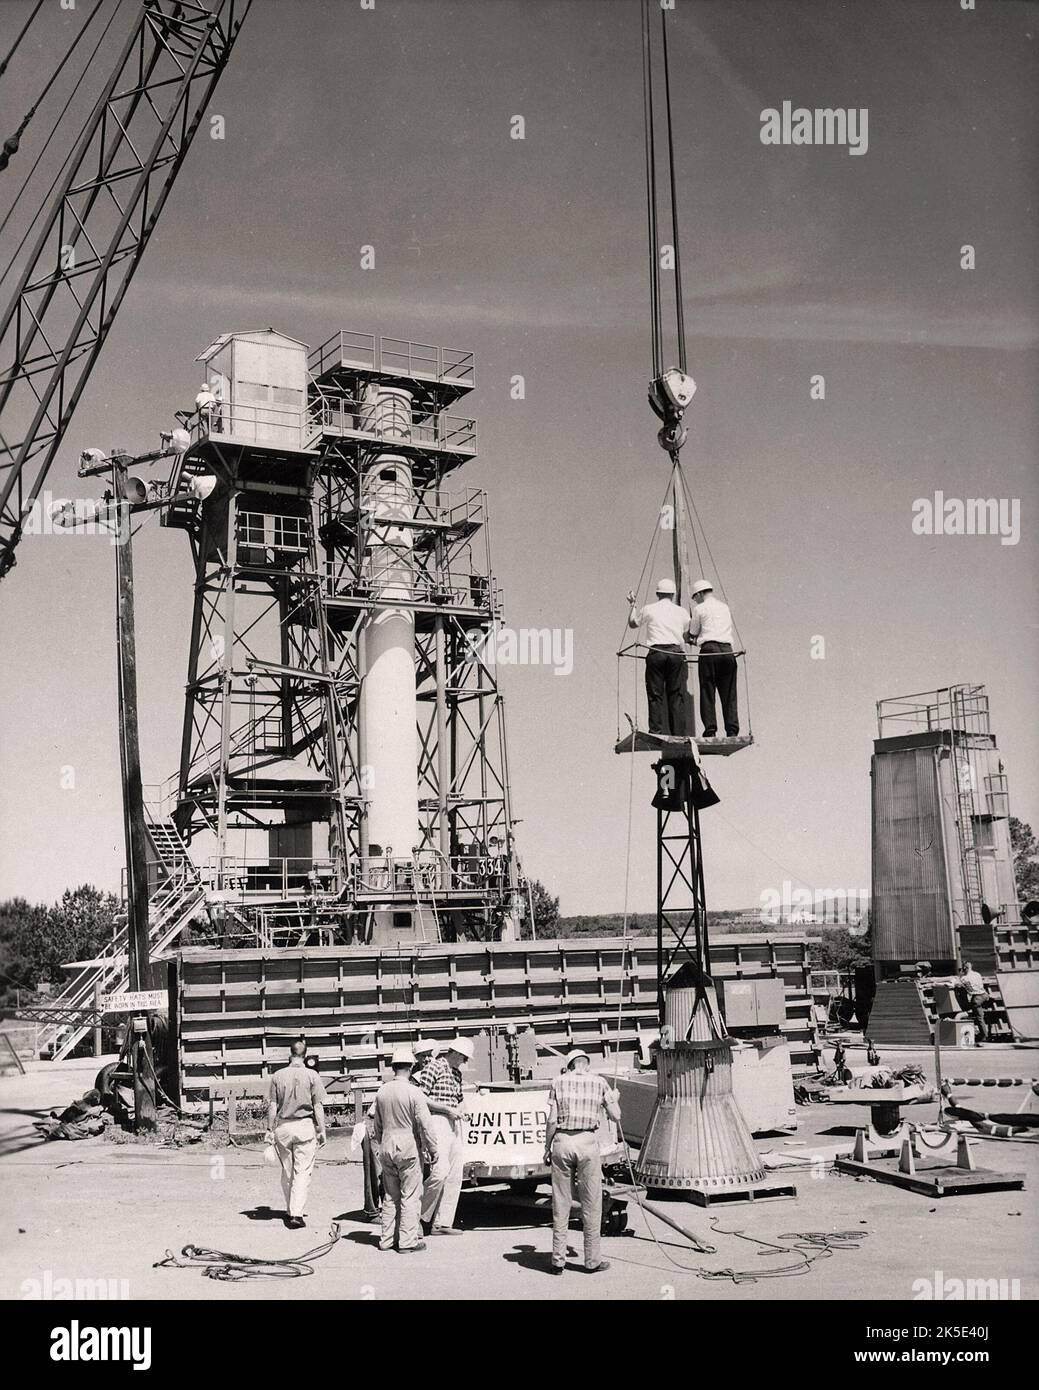 This historical photograph shows the installation of a Mercury capsule and escape system on the top of booster prior to test firing of Mercury-Redstone at the Redstone test stand at the Marshall Space Flight Center (MSFC). 1960. Assembled by MSFC, Mercury-Redstone was designed to place a manned space capsule in orbital flight around the earth and recover both safely. The MSFC, located in Redstone Arsenal, Alabama, is the U.S. government's civilian rocketry and spacecraft propulsion research center. An optimised version of an original NASA image. Credit: NASA Stock Photo